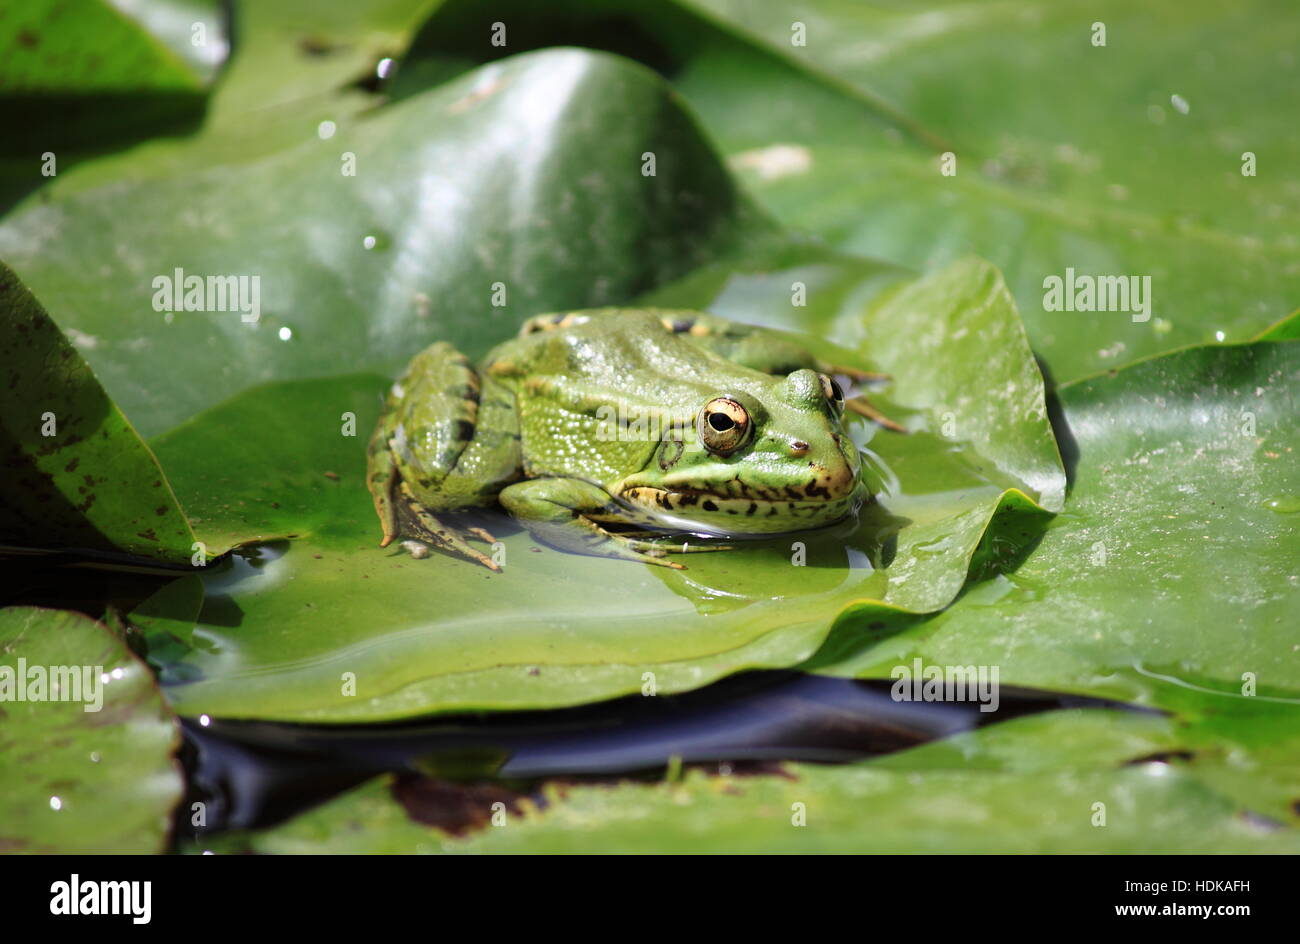 Closeup of a frog on a lily pond Stock Photo